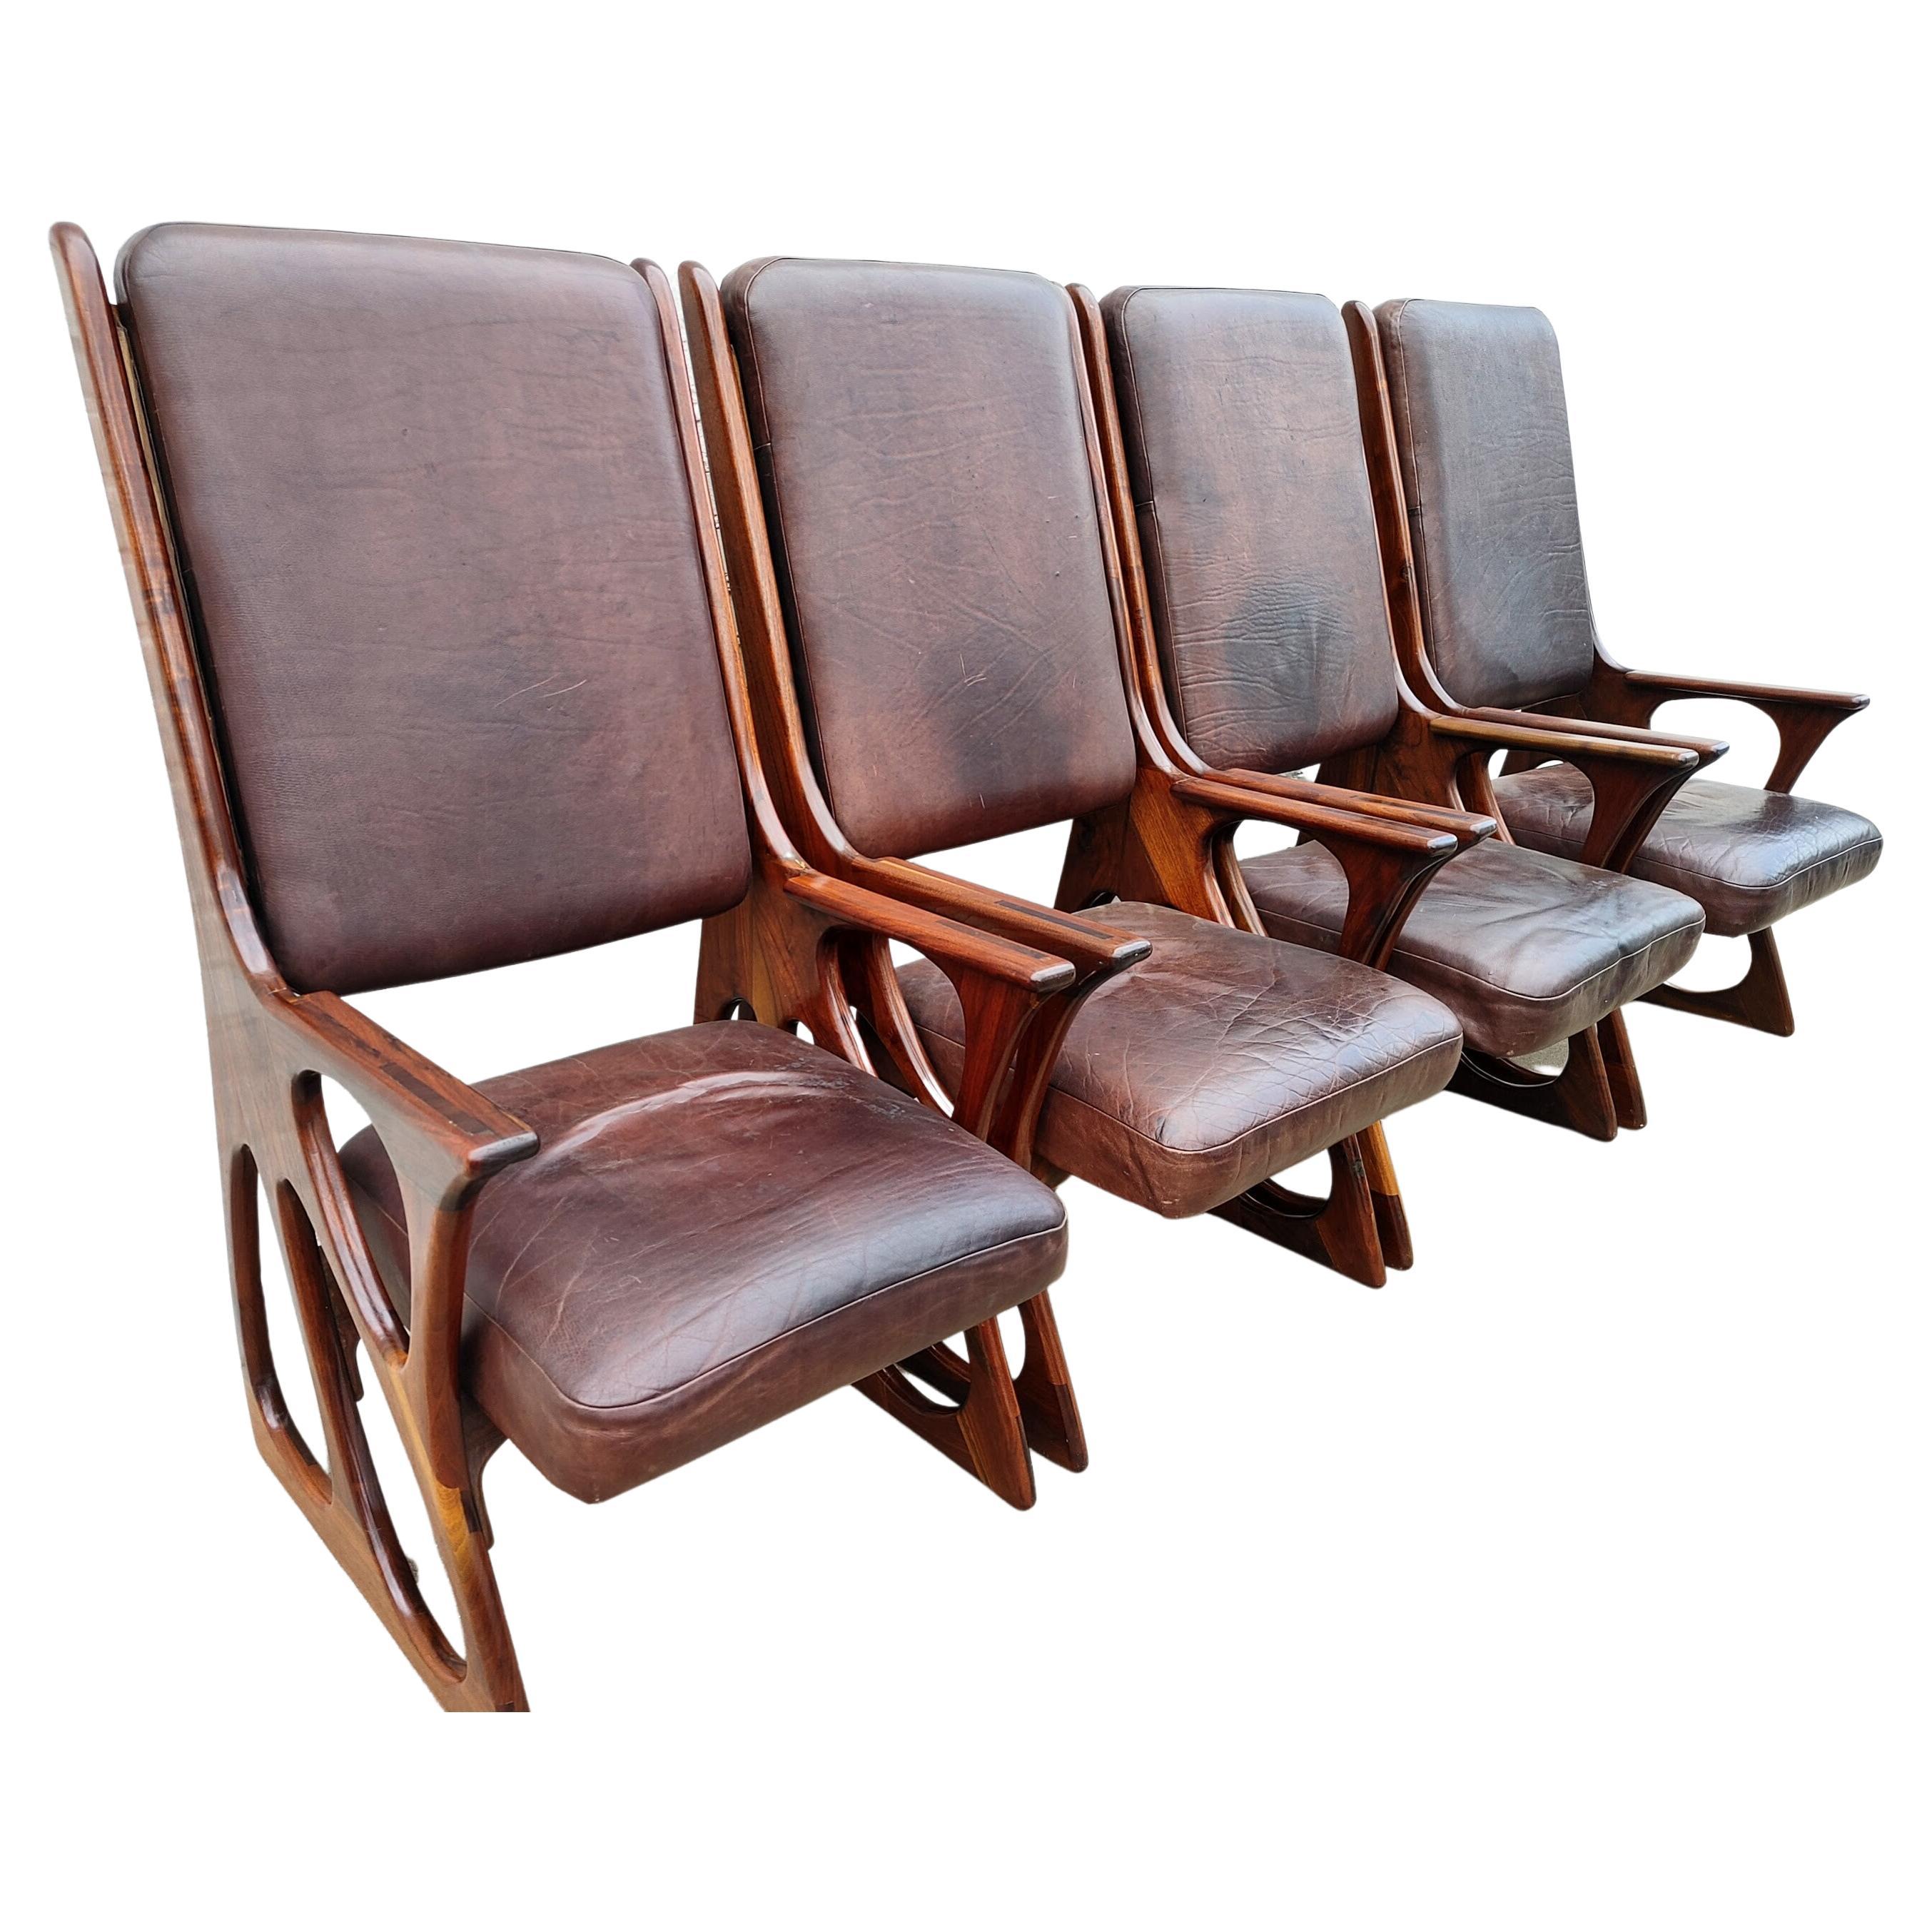 American Studio Craft Wendell Castle Inspired Chairs